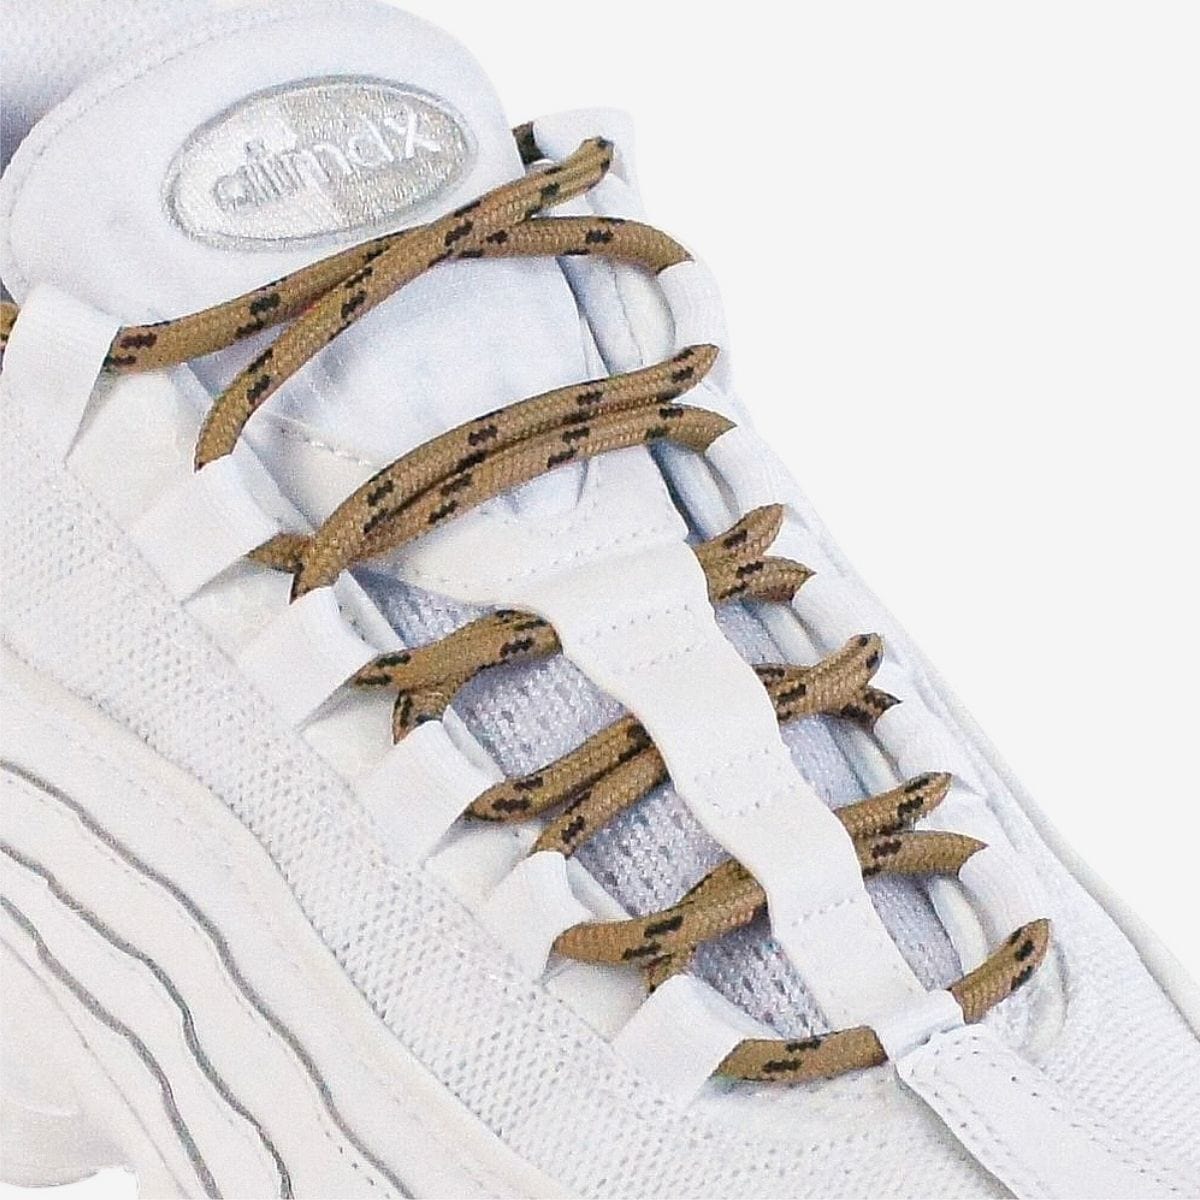 walking-shoe-laces-online-in-australia-colour-light-brown-and-black